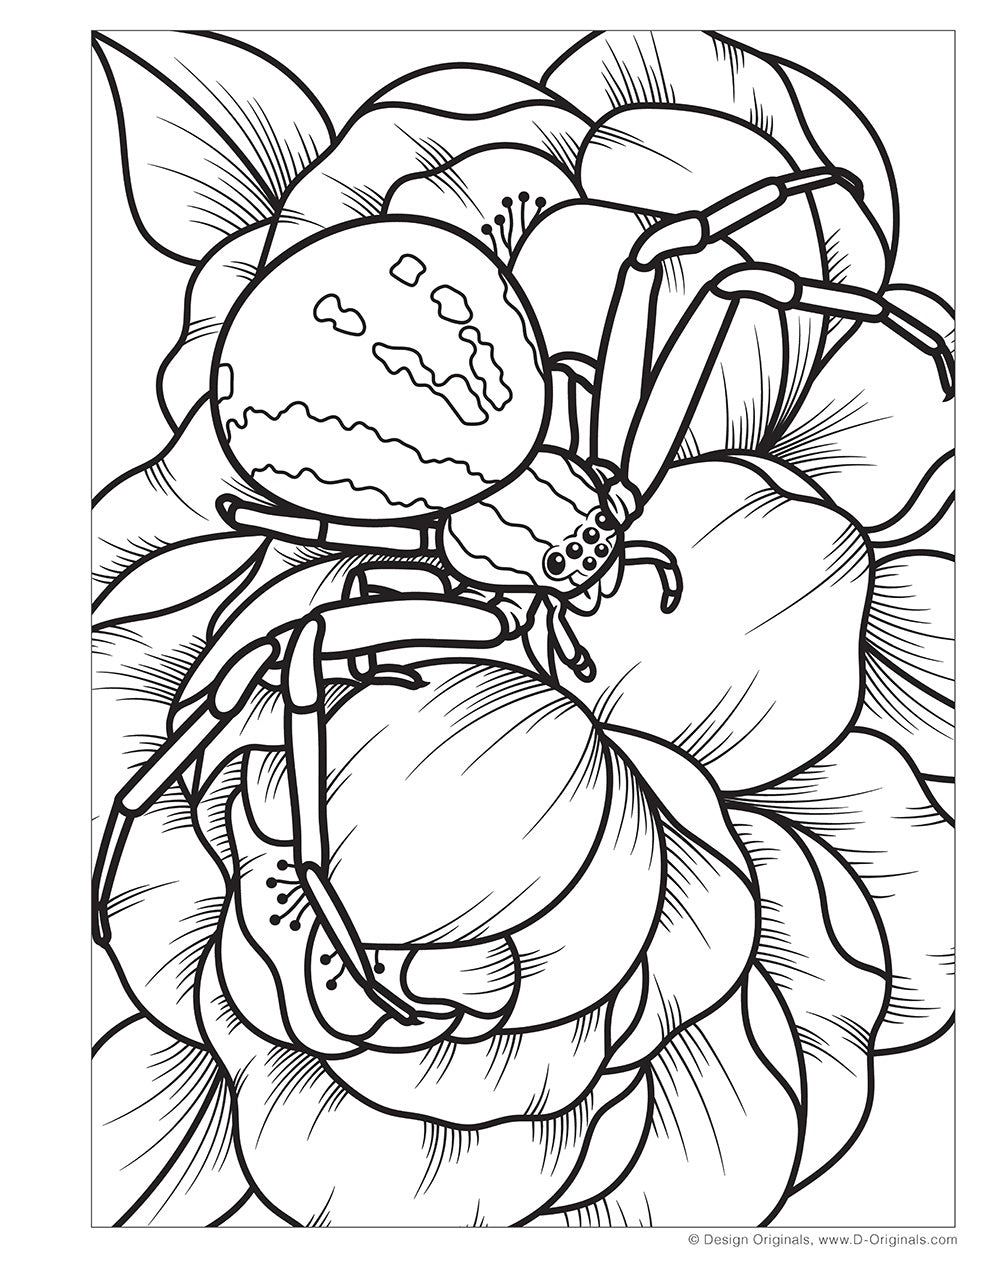 Super Cool Bugs and Spiders Coloring Book